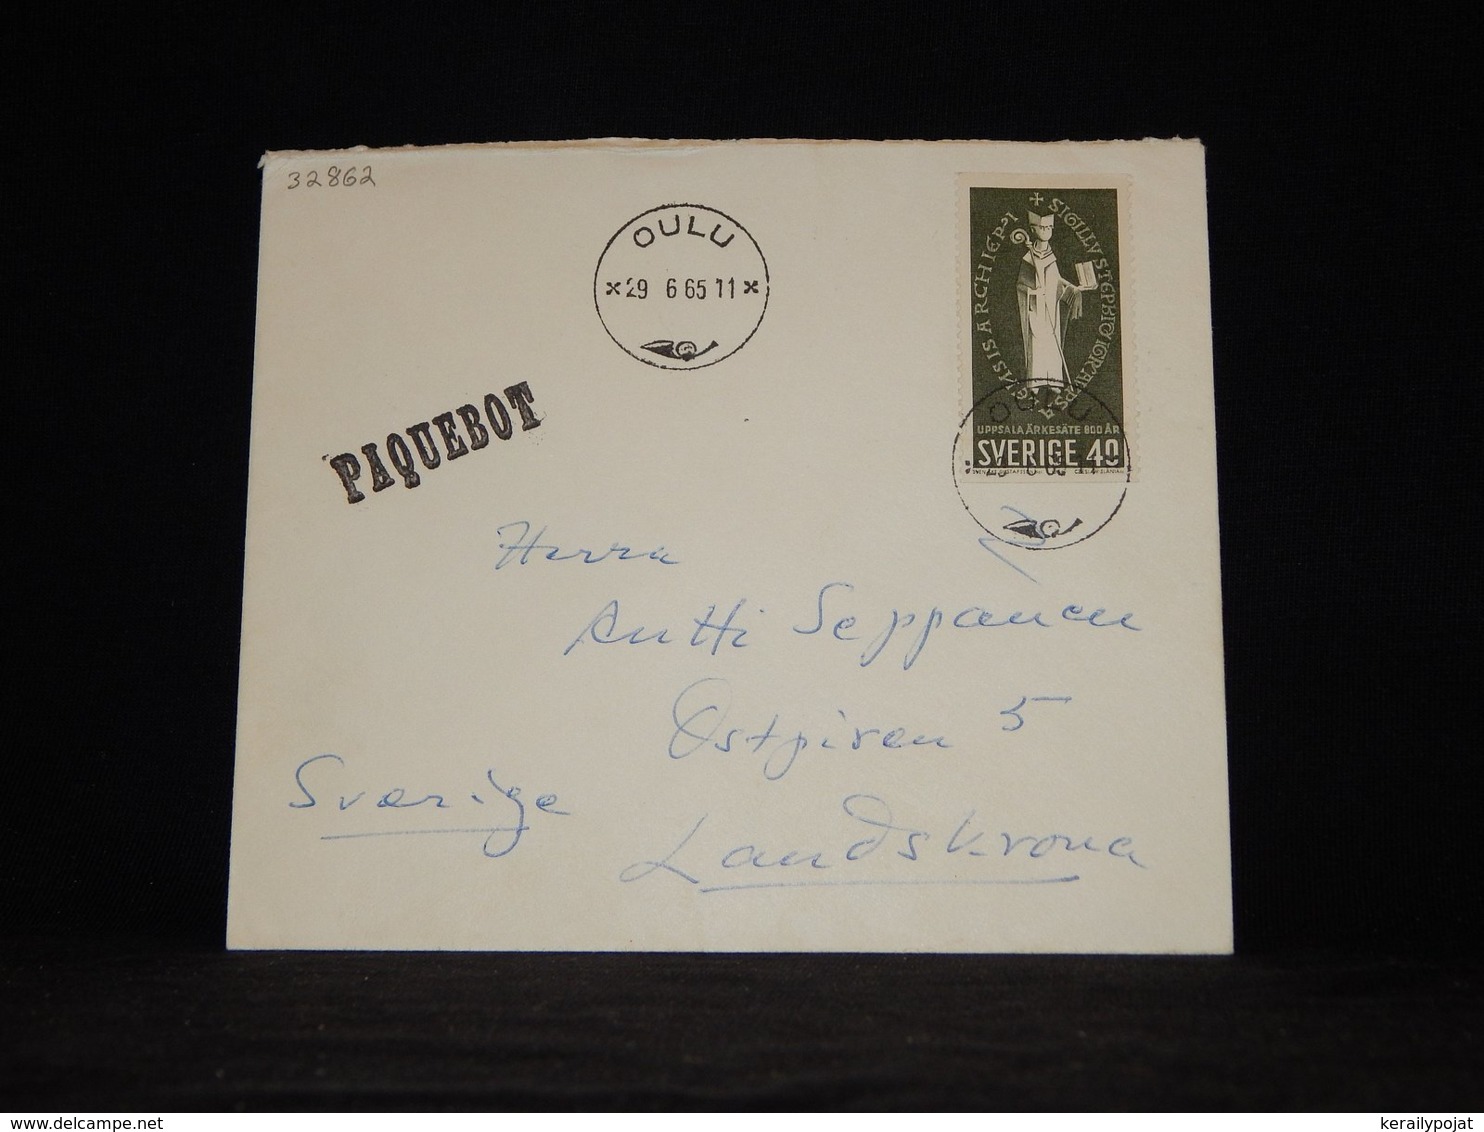 Sweden 1965 Oulu Paquebot Cover__(L-32862) - Covers & Documents